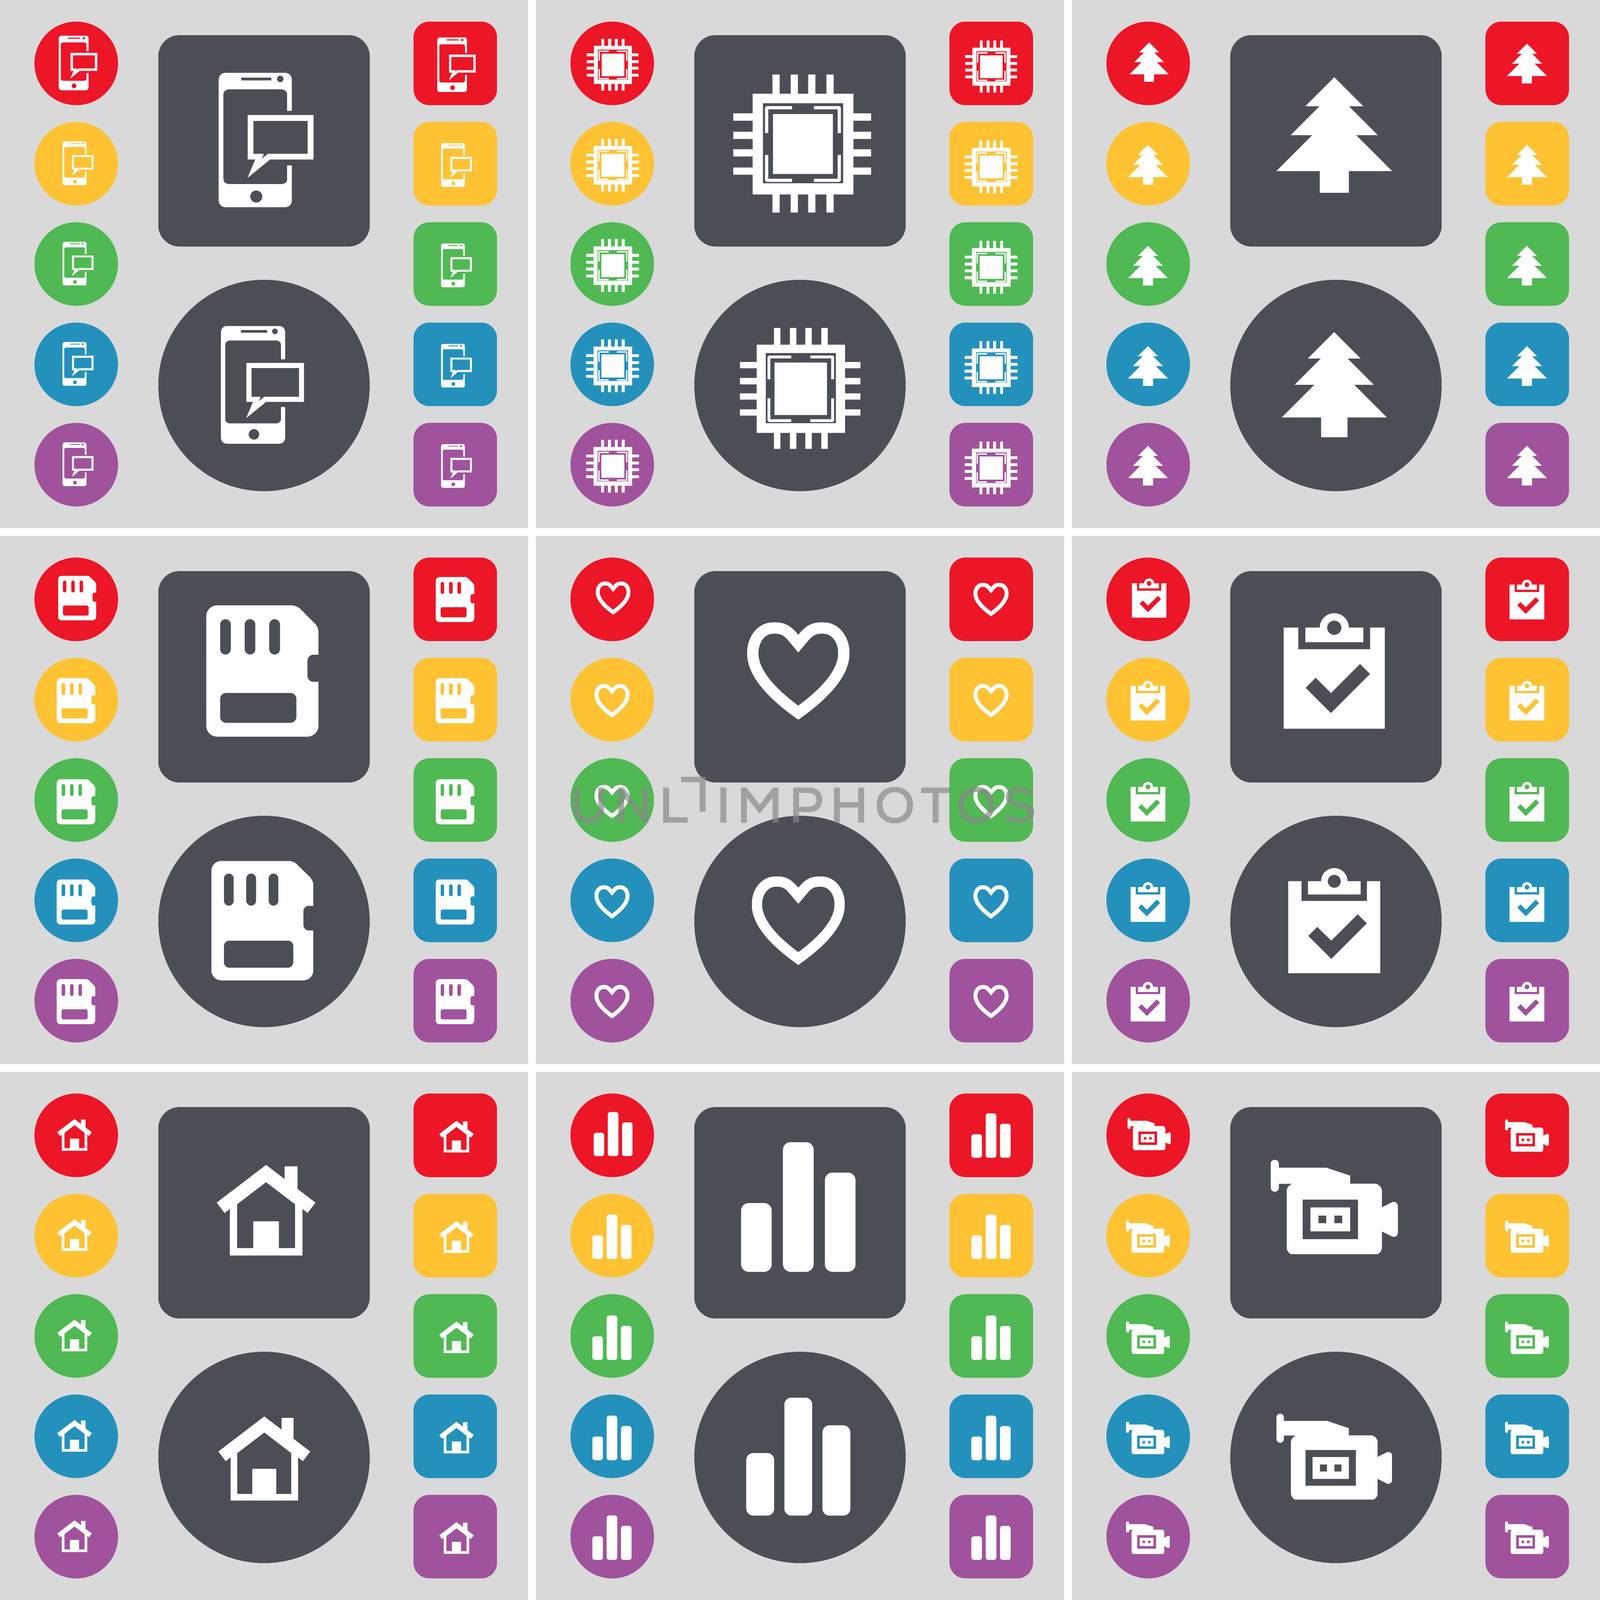 SMS, Processor, Firtree, SIM card, Heart, Survey, House, Diagram, Film camera icon symbol. A large set of flat, colored buttons for your design. illustration